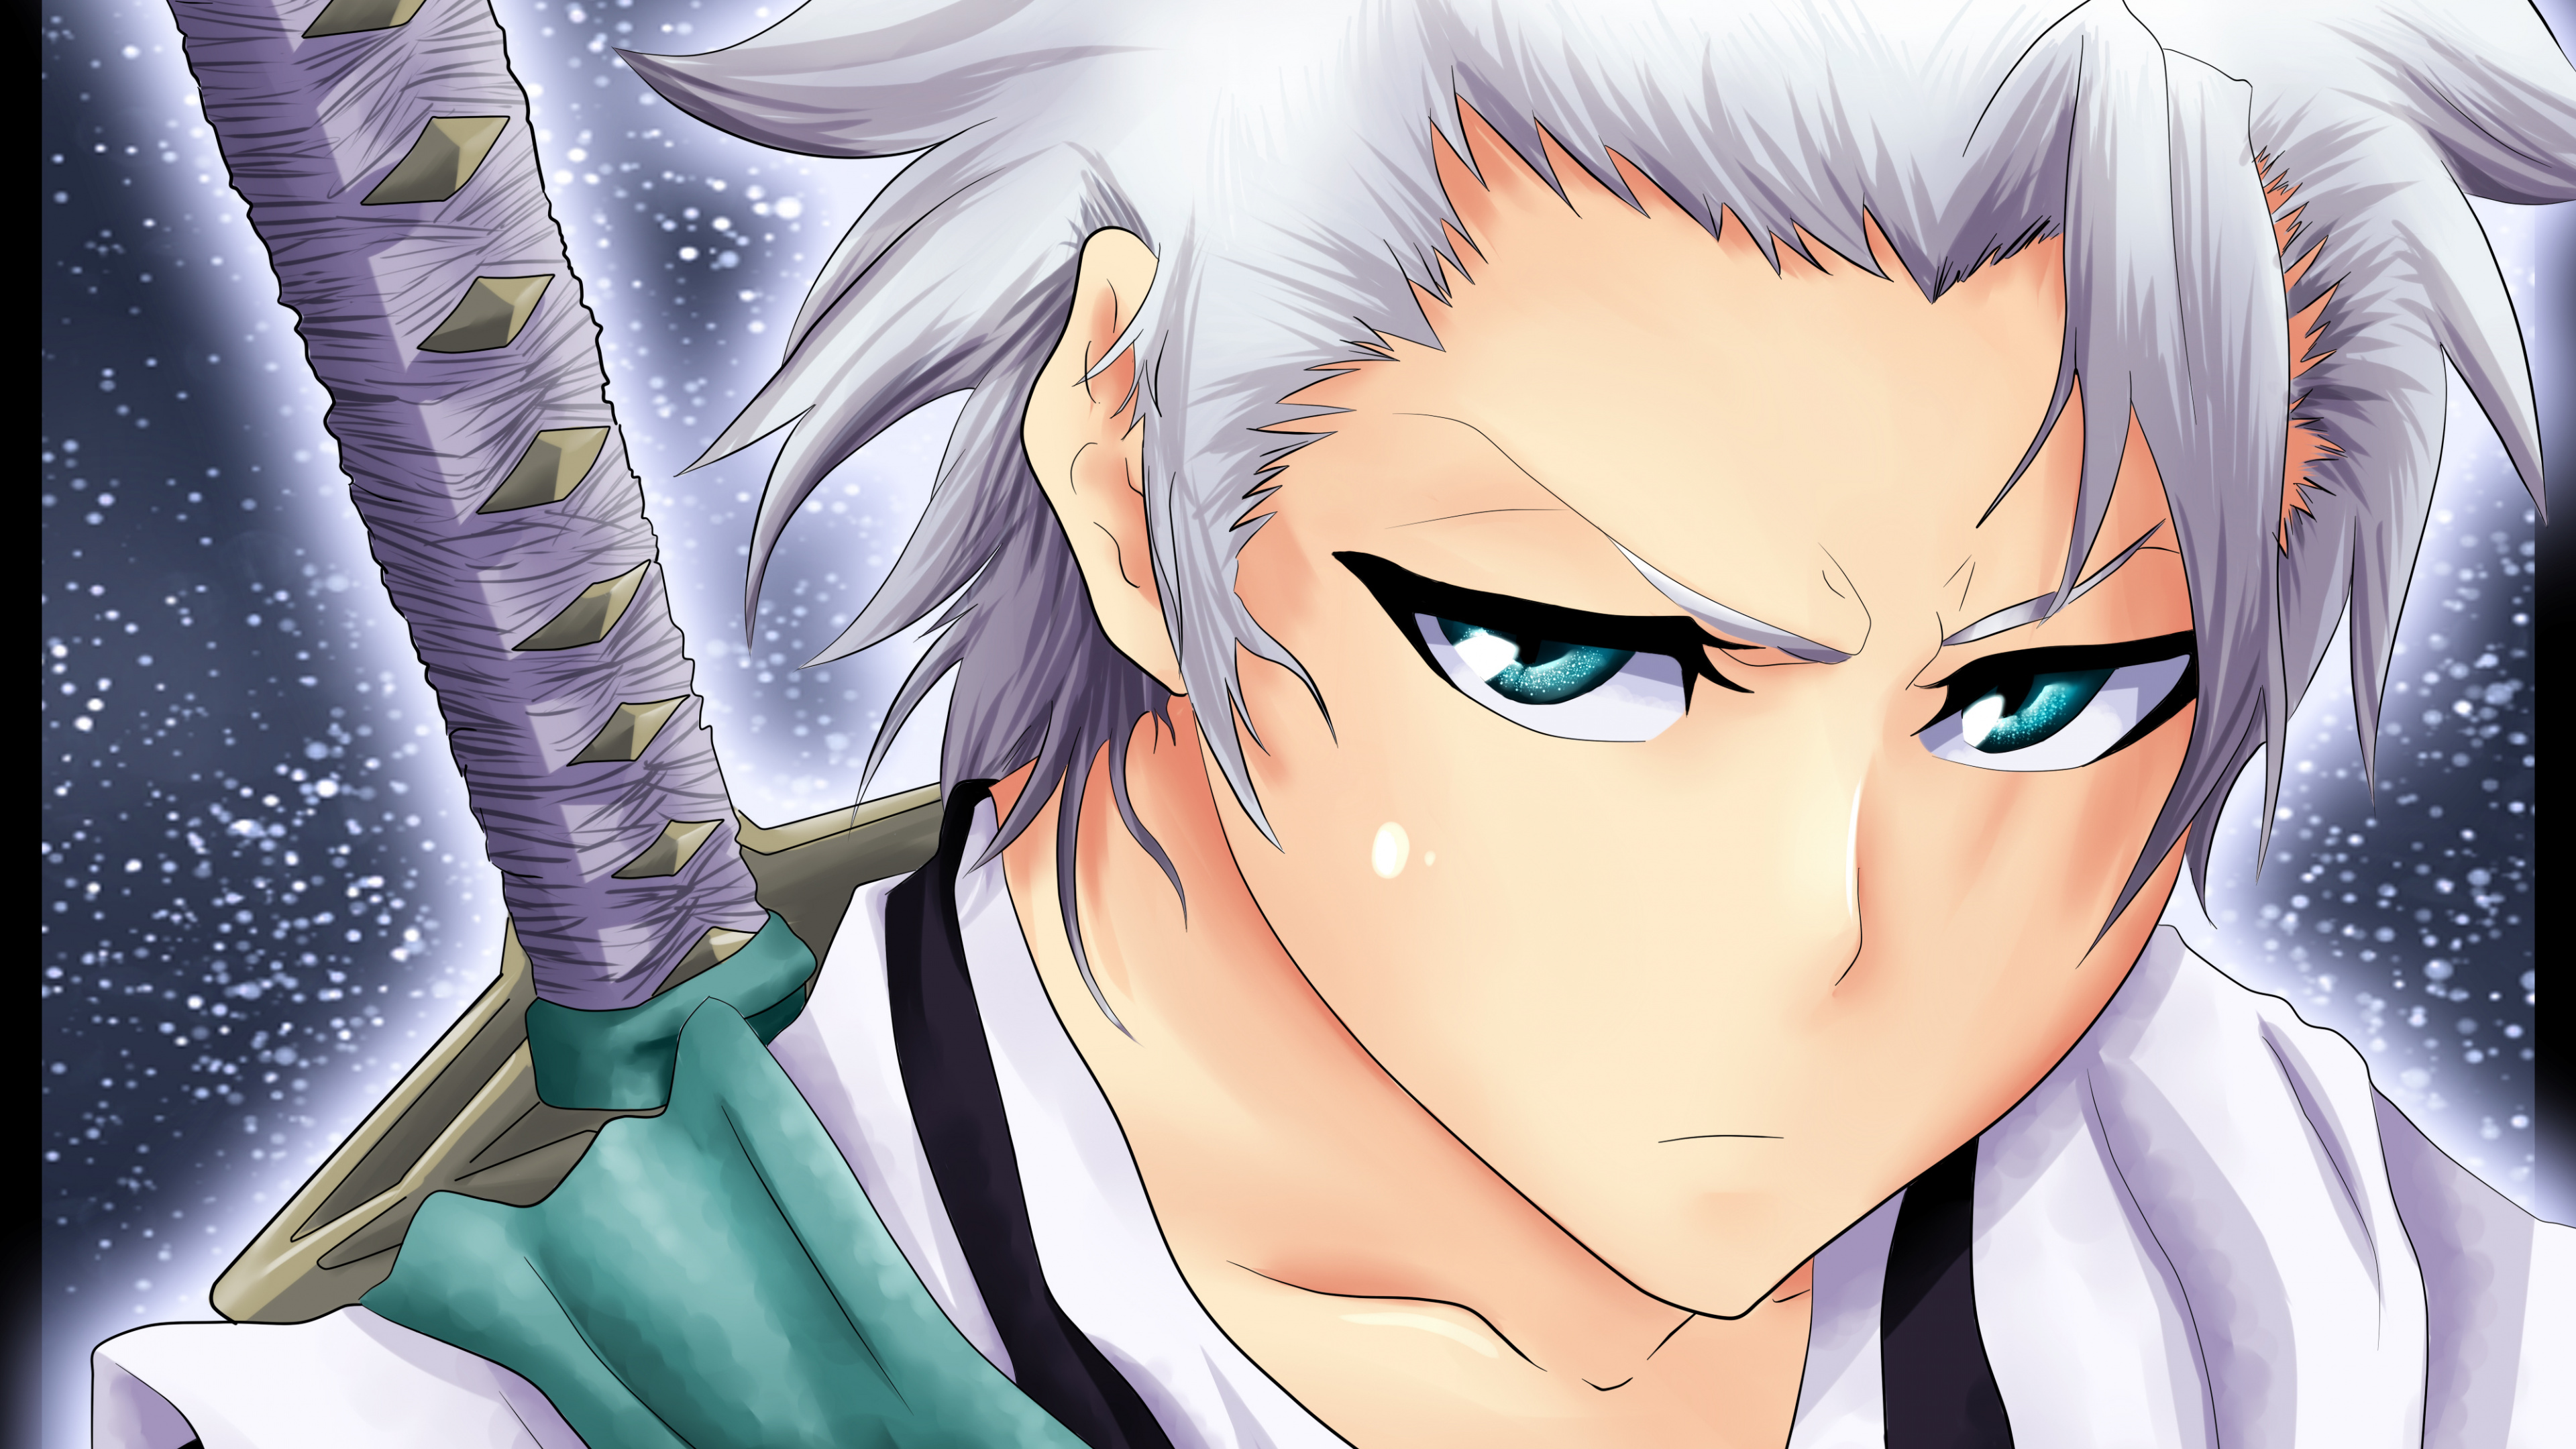 Personnage D'anime Masculin Aux Cheveux Bruns. Wallpaper in 3840x2160 Resolution